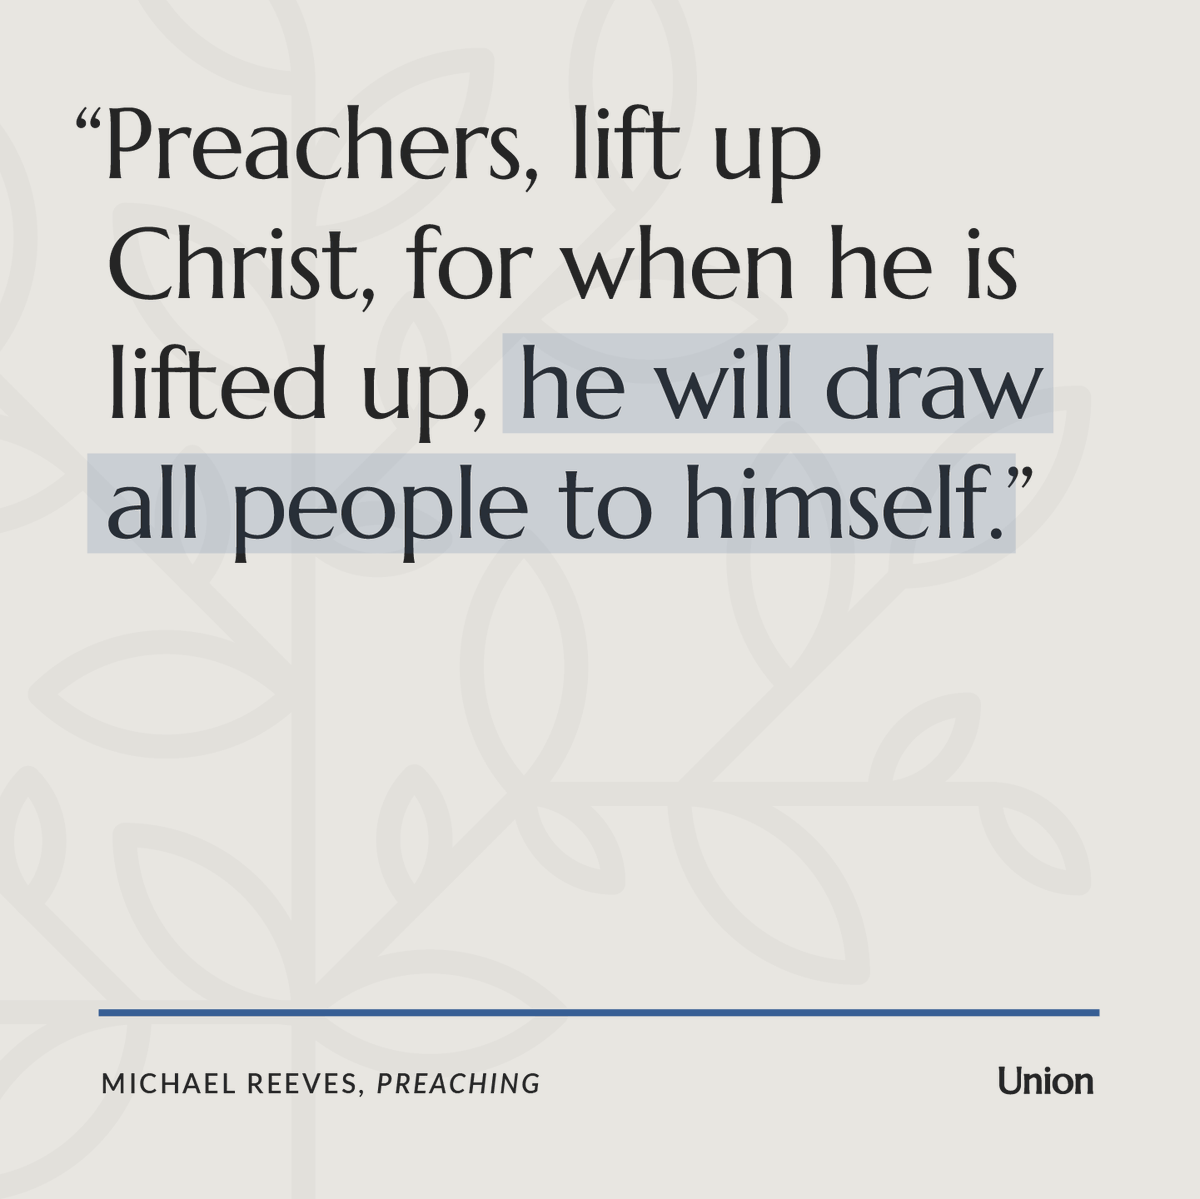 Preachers, lift up Christ, for when he is lifted up, he will draw all people to himself. From 'Preaching' by @mike_reeves. Pre-order from @UnionPublishing now: unionpublishing.org/product/preach…